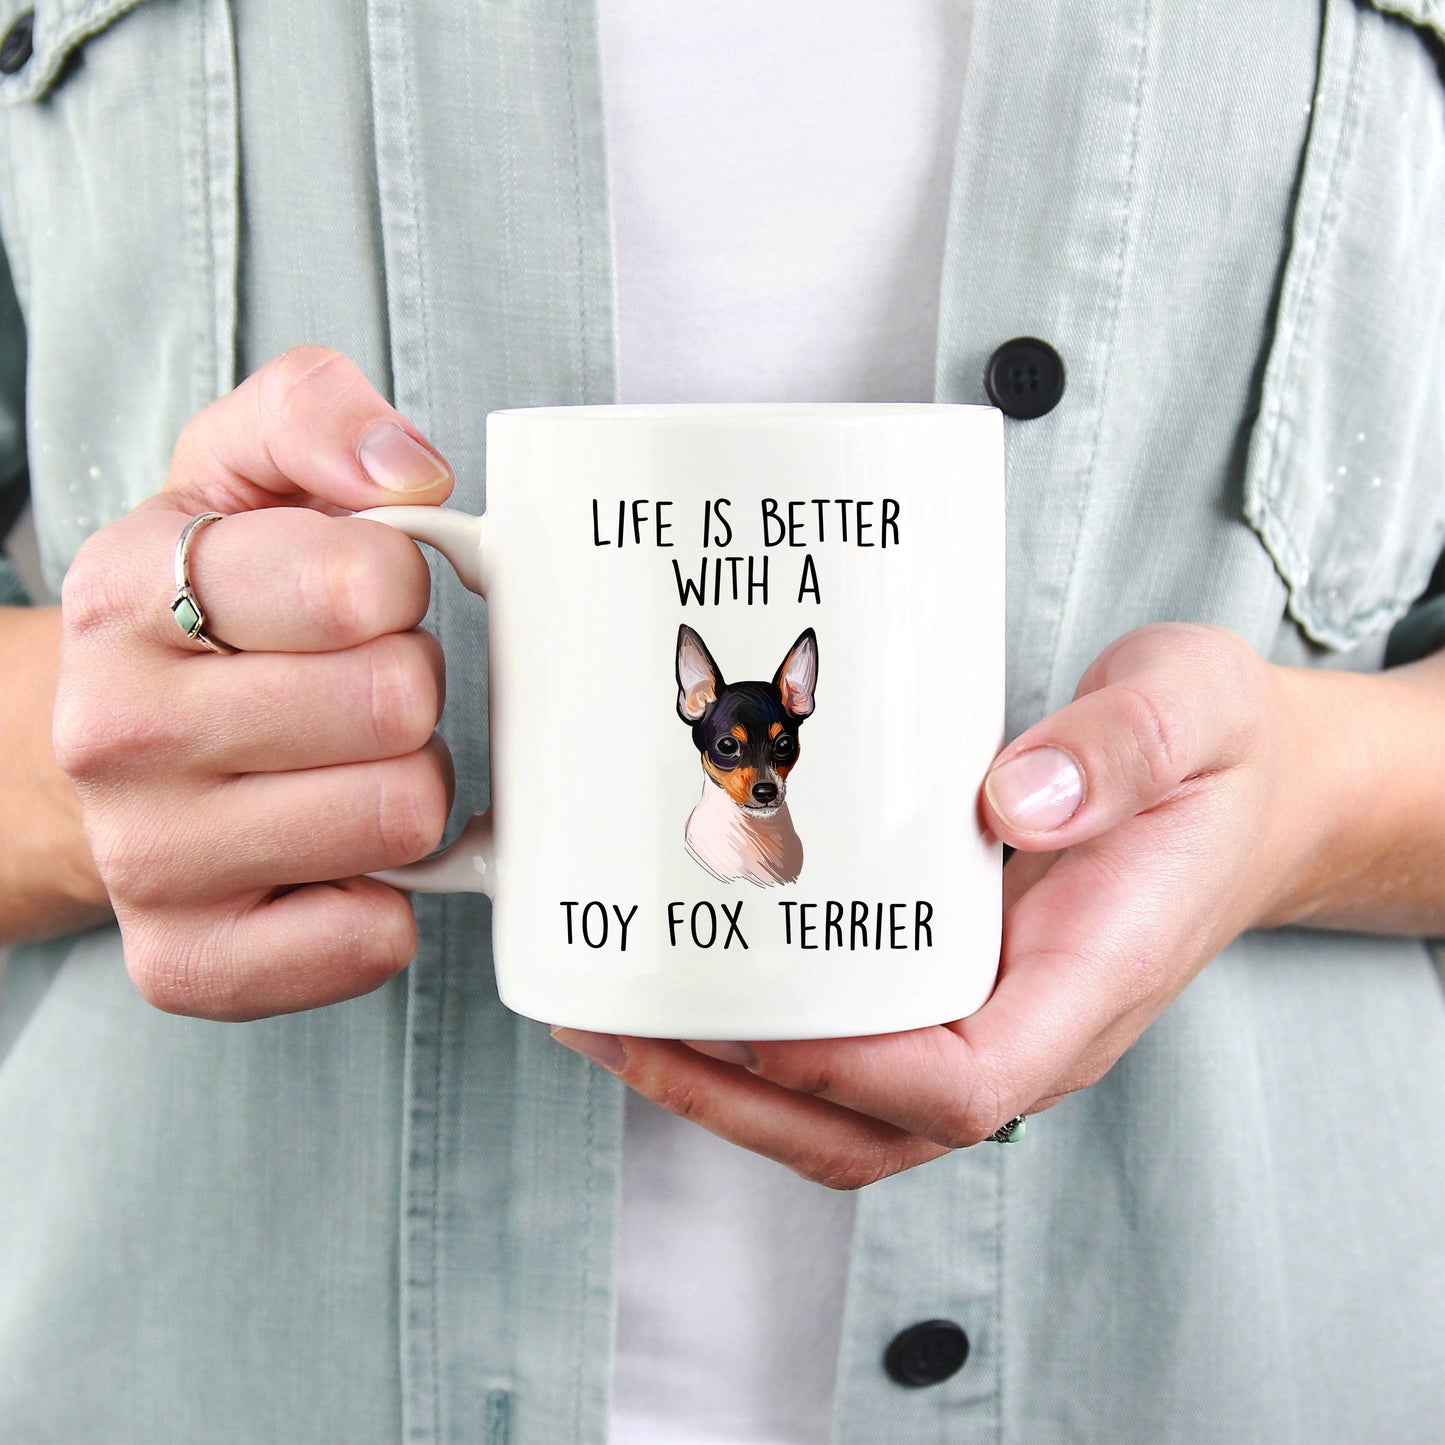 Life is Better with a Tox Fox Terrier Dog Ceramic Coffee Mug